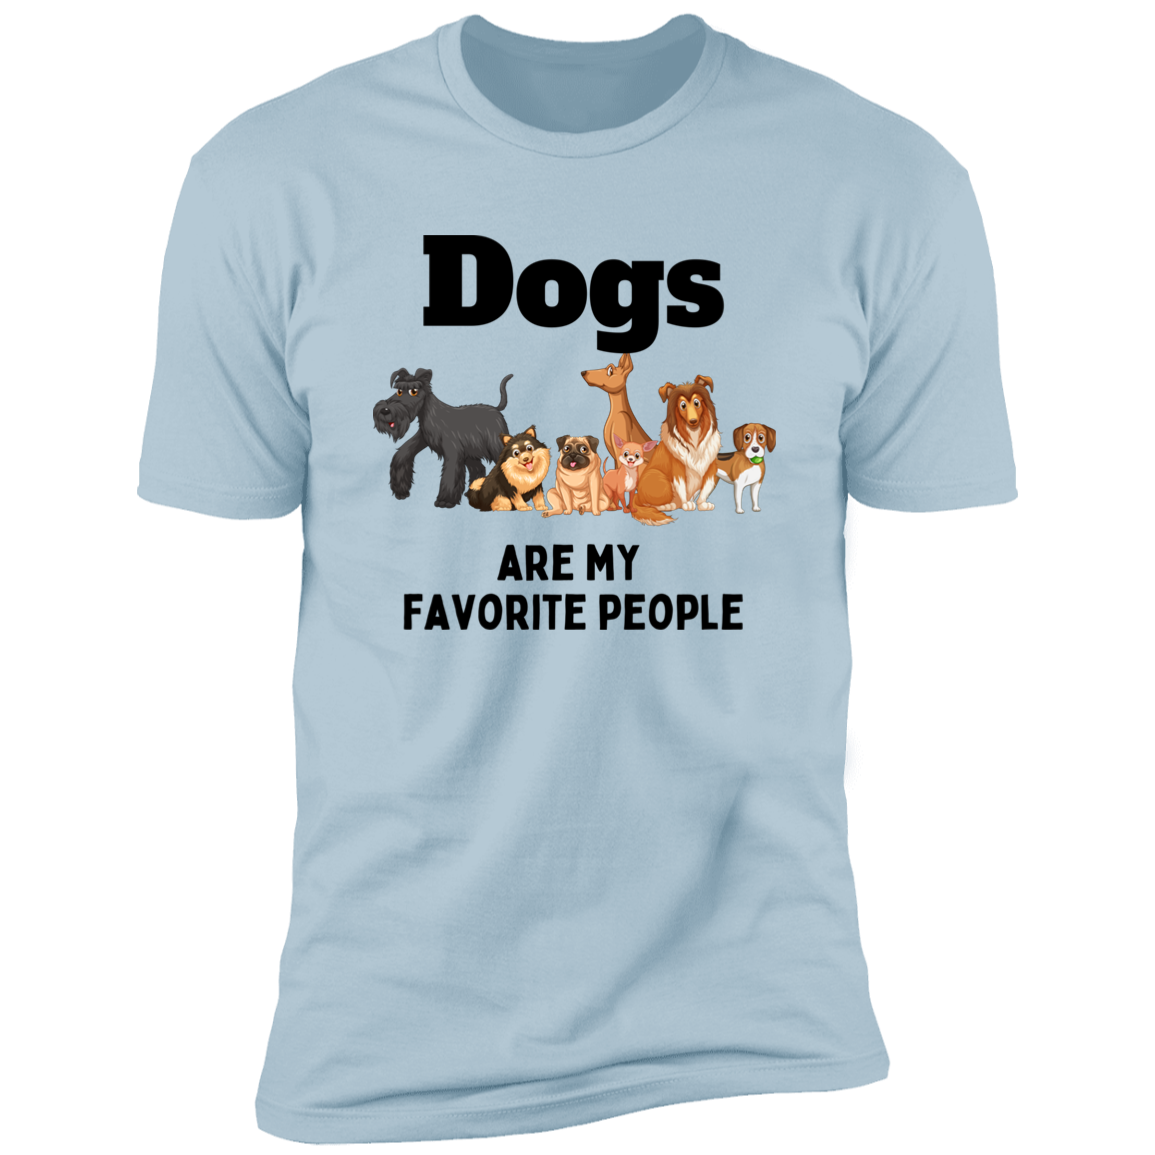 Dogs Are My Favorite People t-shirt, dog shirt for humans, in light blue